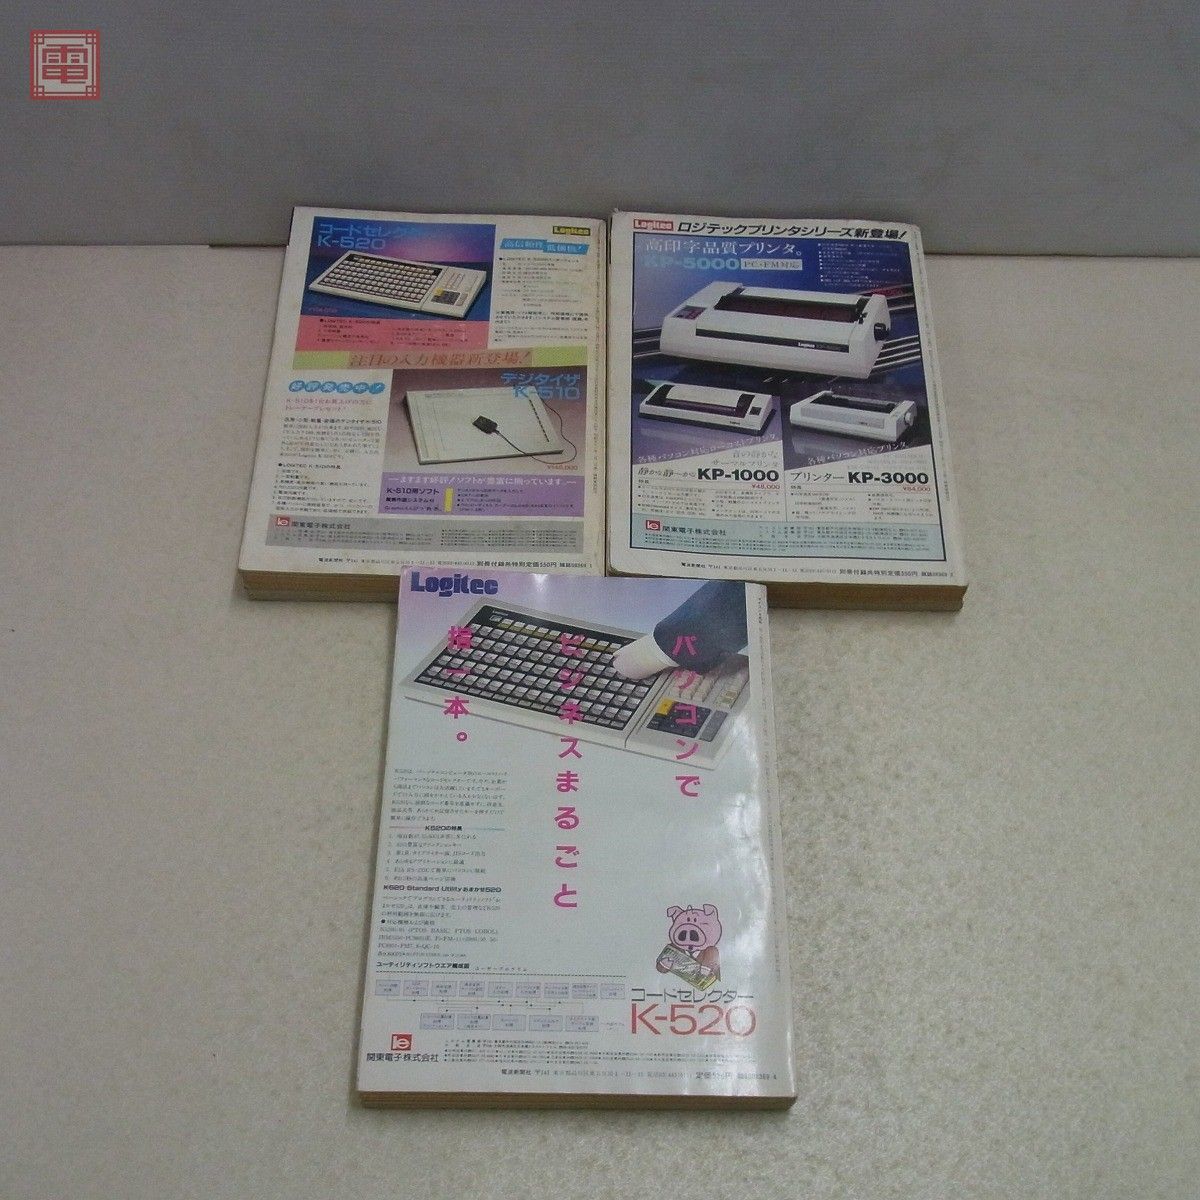  magazine monthly microcomputer 1984 year 8 pcs. set don't fit radio wave newspaper company [20